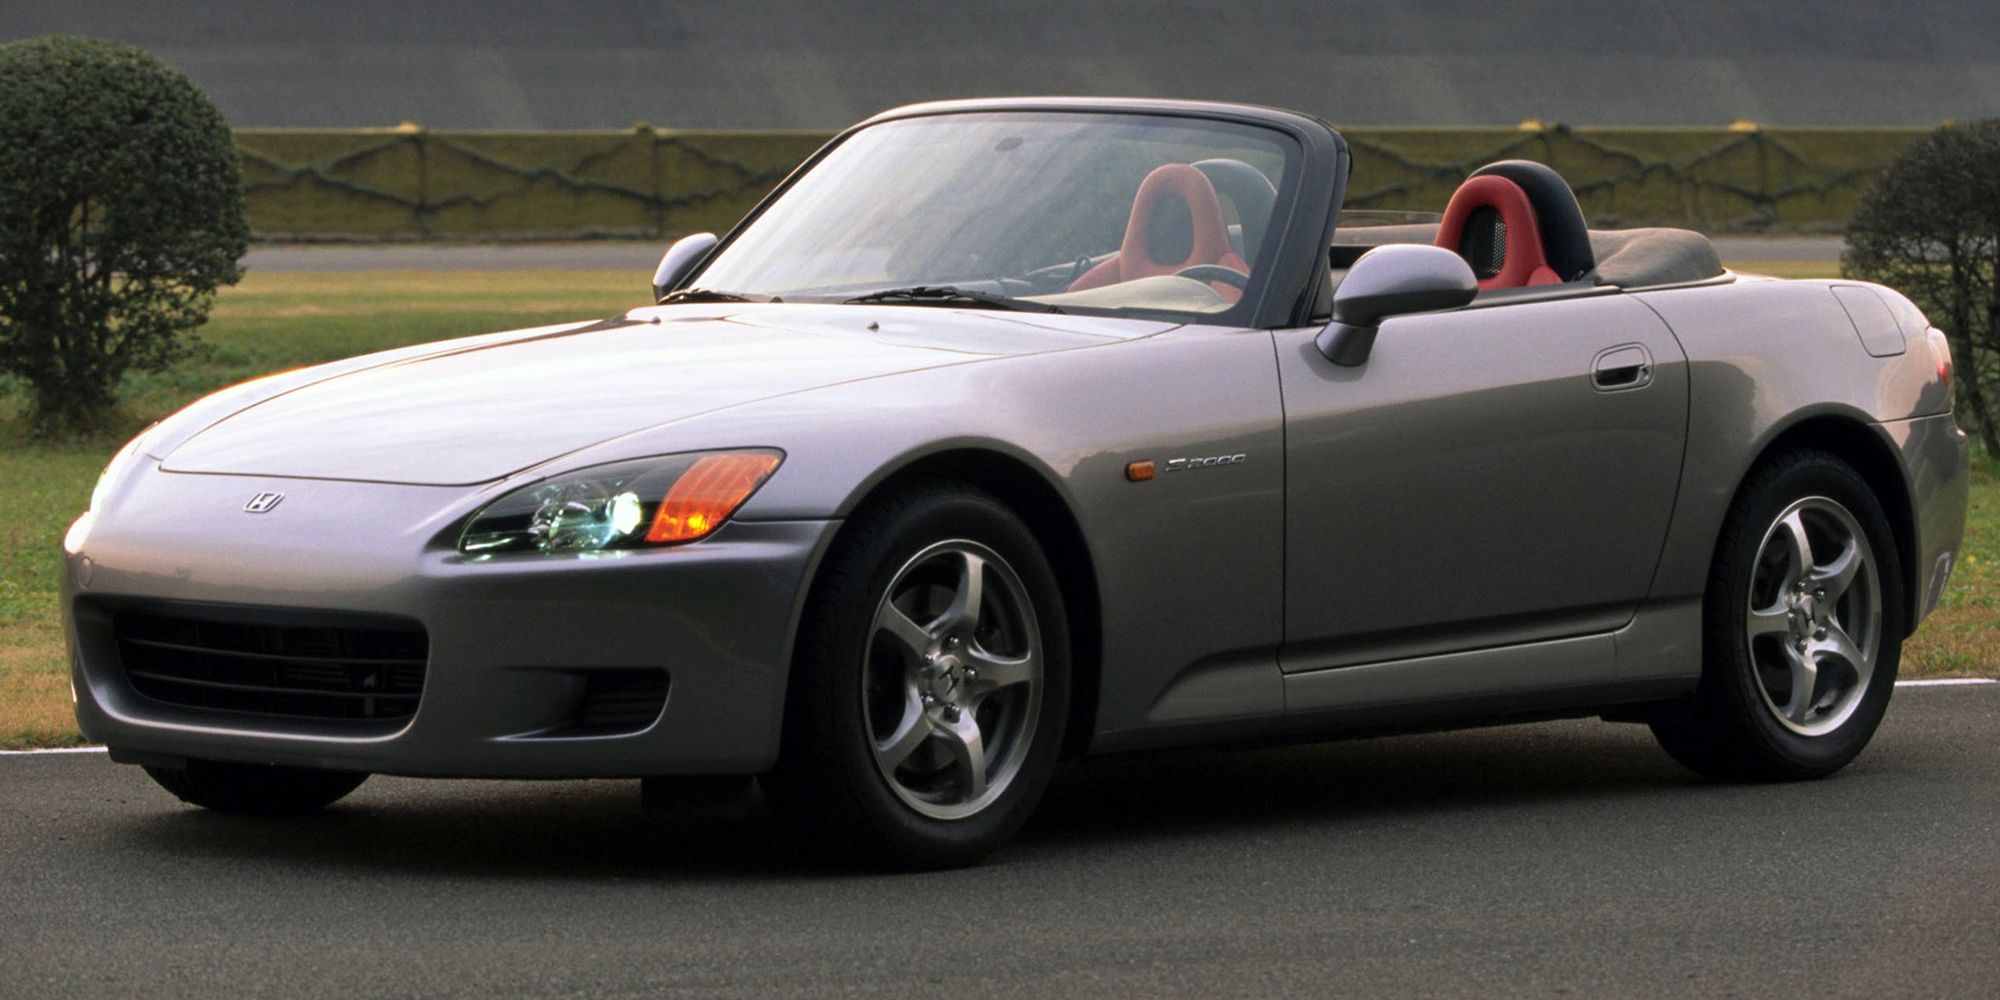 Front 3/4 view of a silver S2000